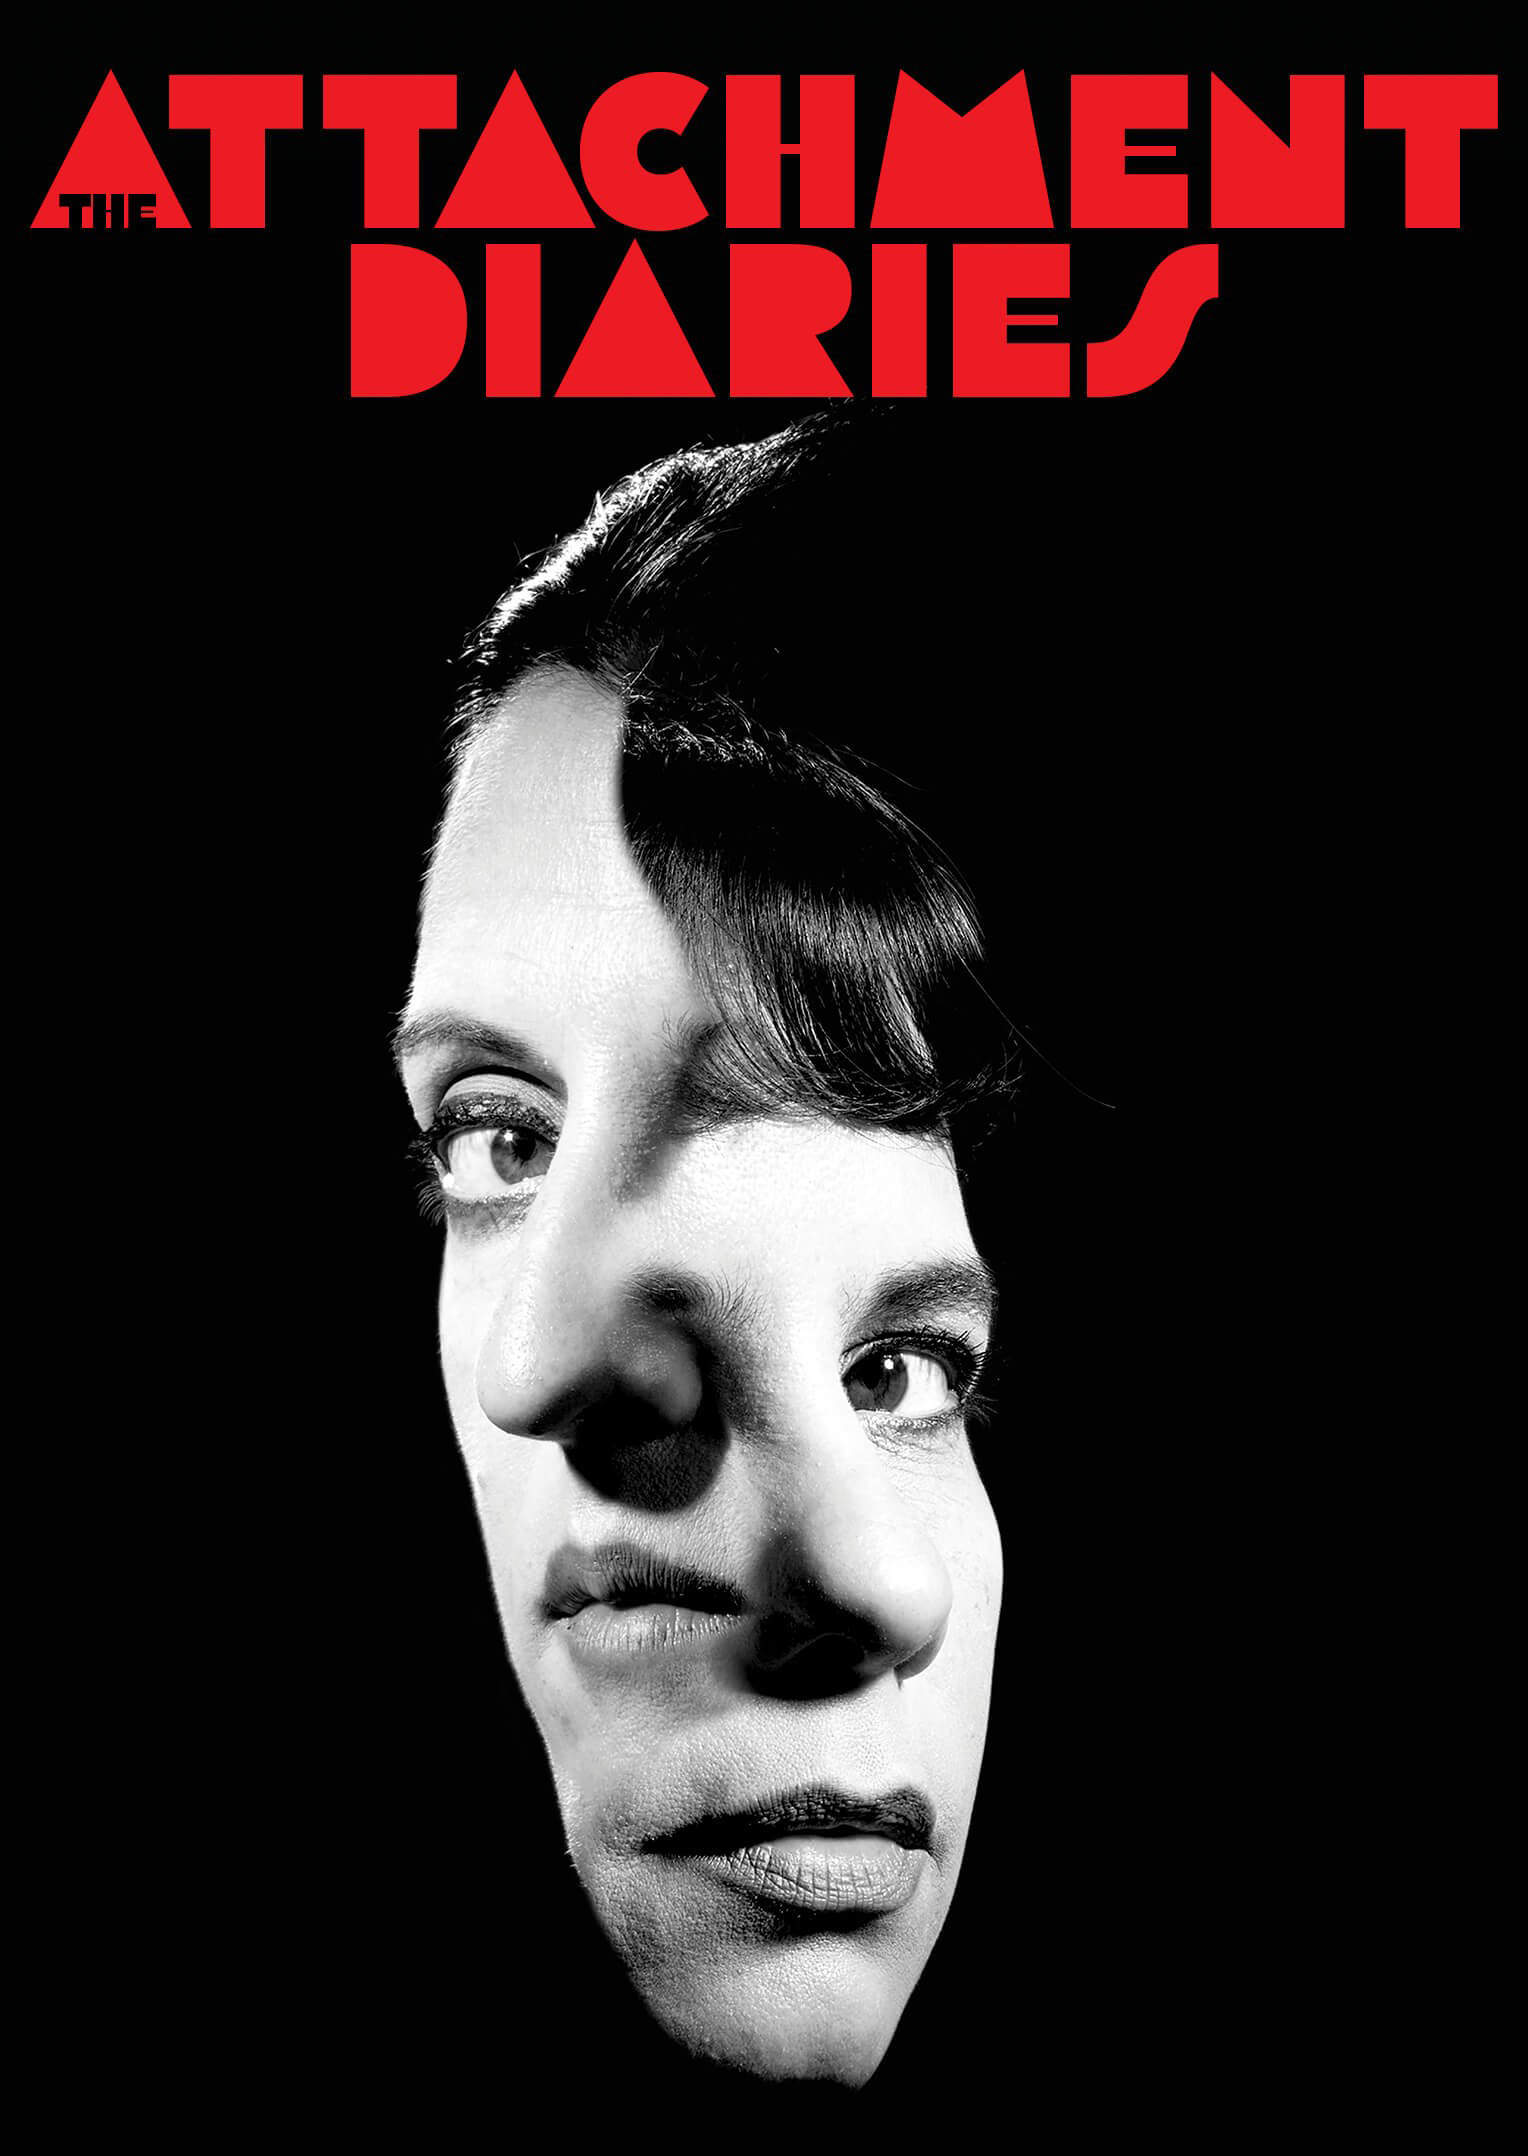 Mark Your Calendars for Dark Sky Films' Release of The Attachment Diaries on 4/21 19